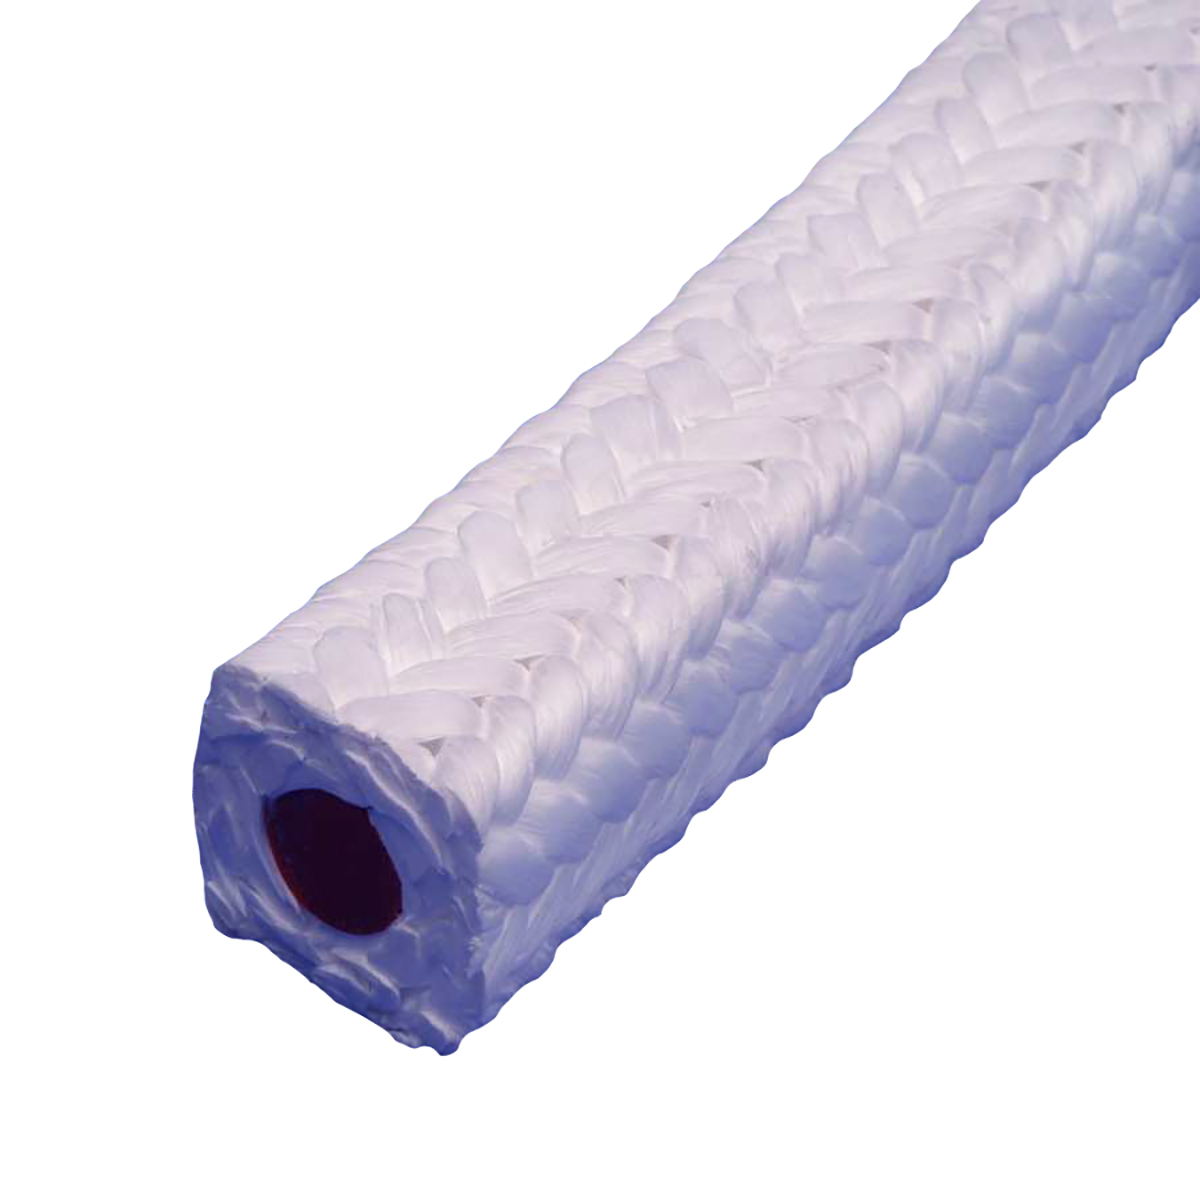 A low friction packing made from pure PTFE filament around a silicone rubber core, Marigold 344-SC Packing is ideal for sealing aggressive chemicals.